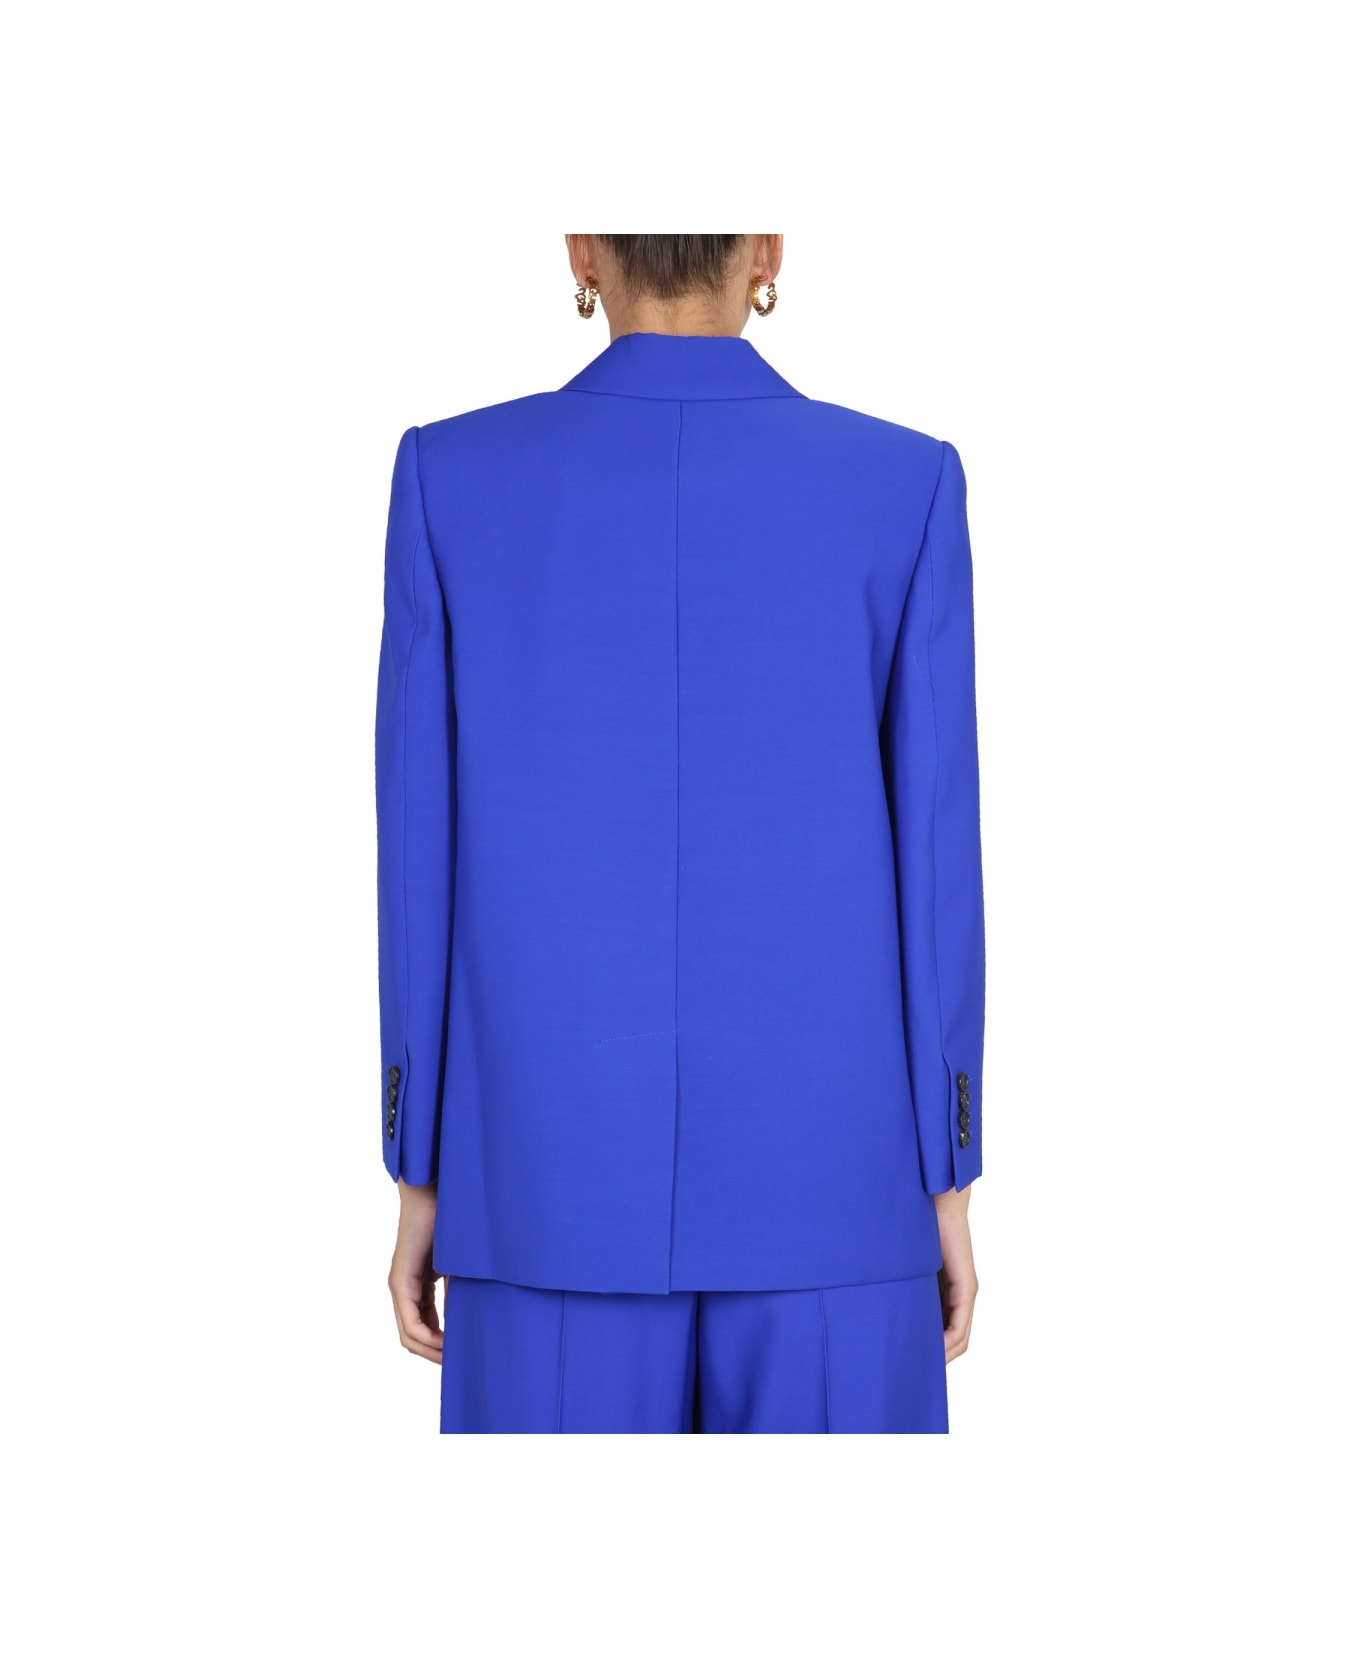 Alexander McQueen Structured Double-breasted Jacket - BLUE